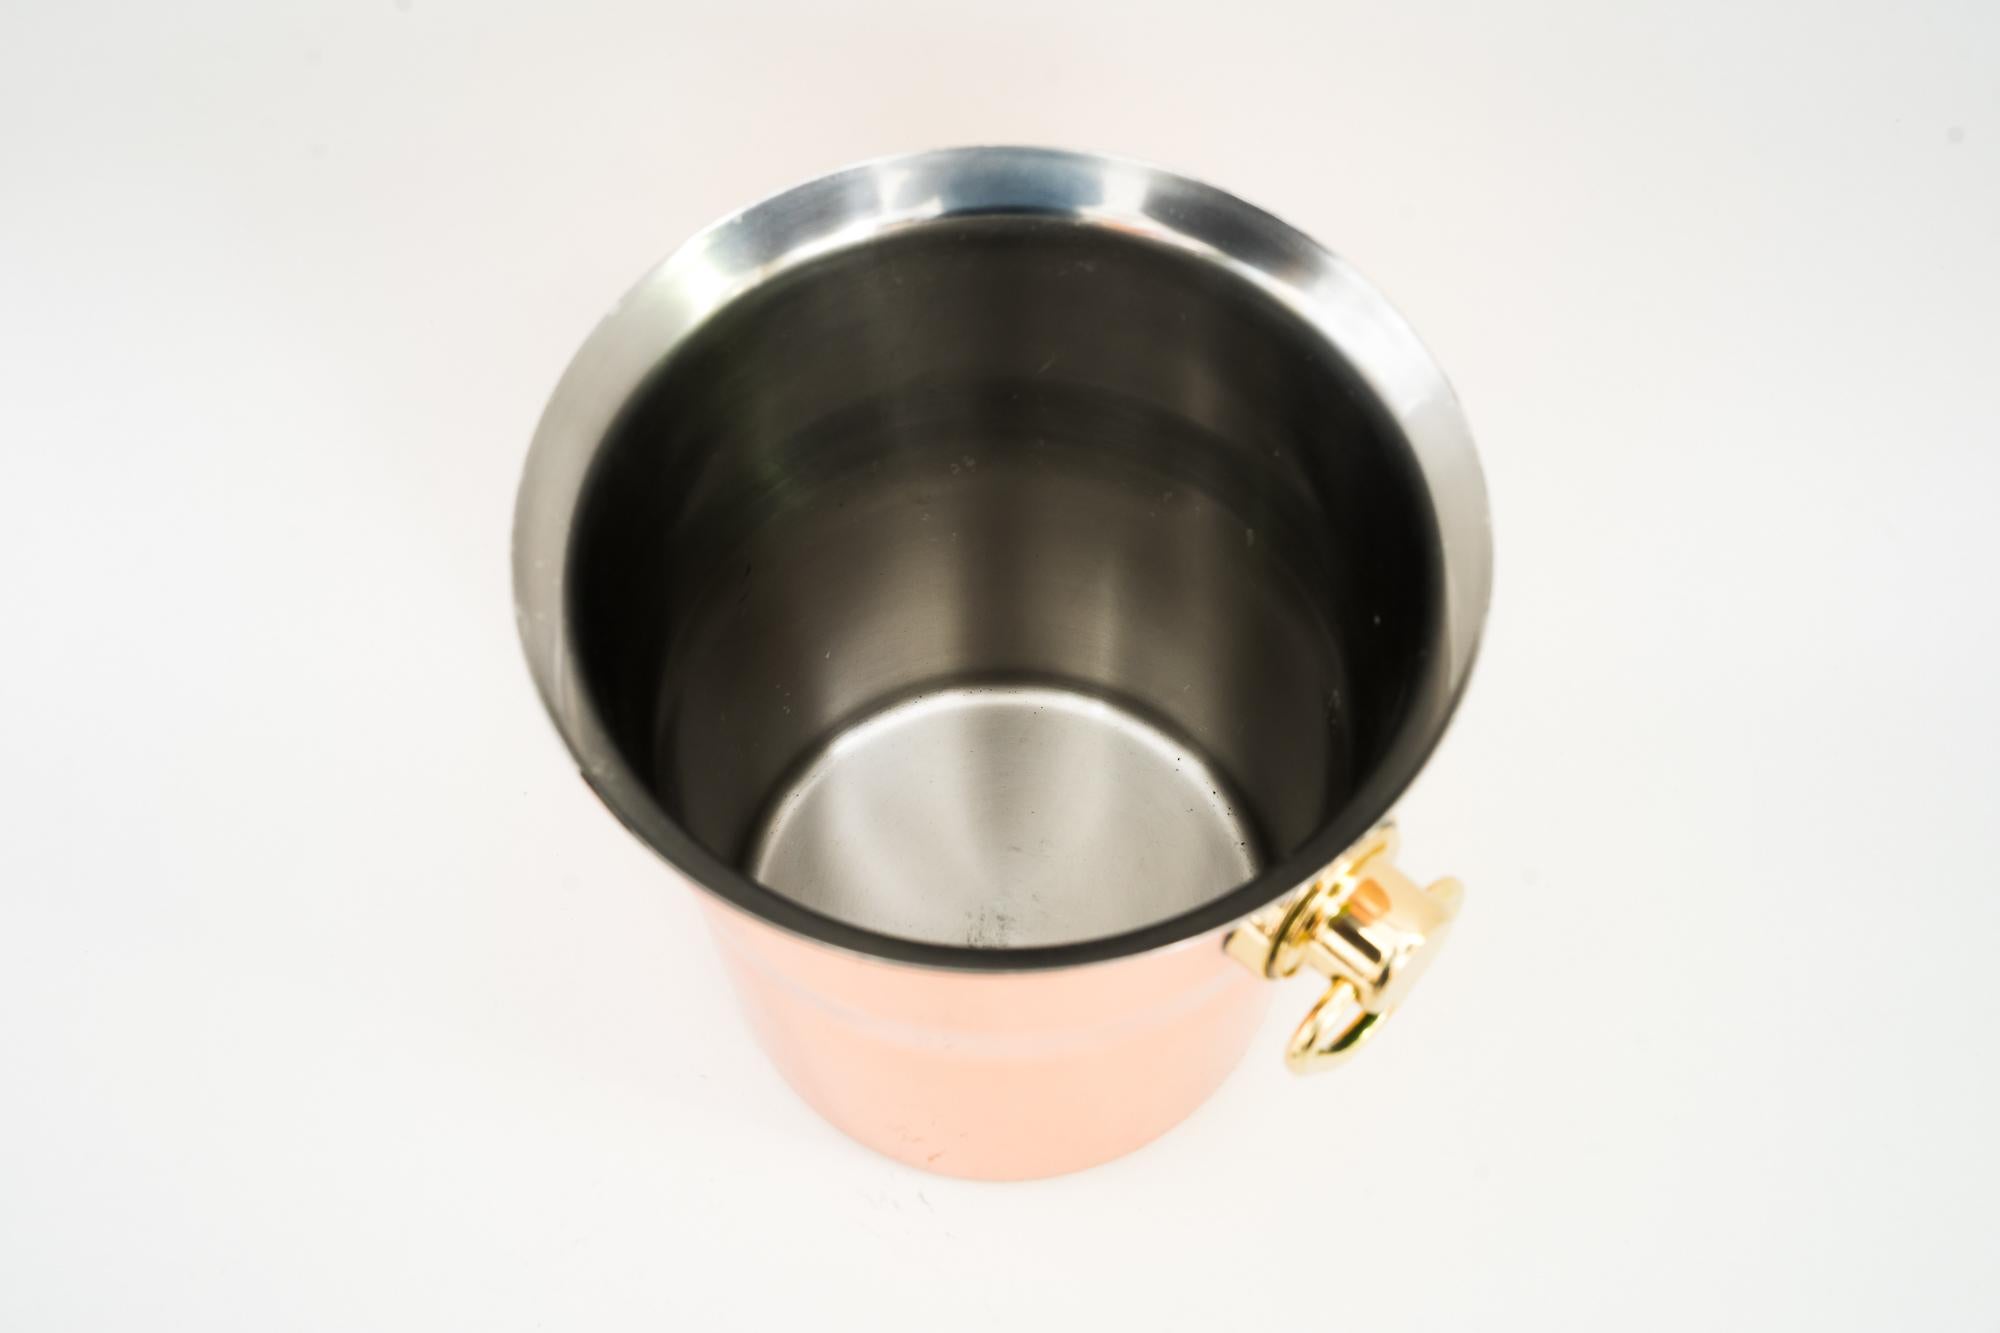 Champagne Bucket copper and brass Switzerland around, 1950s
Polished and stove enamelled.